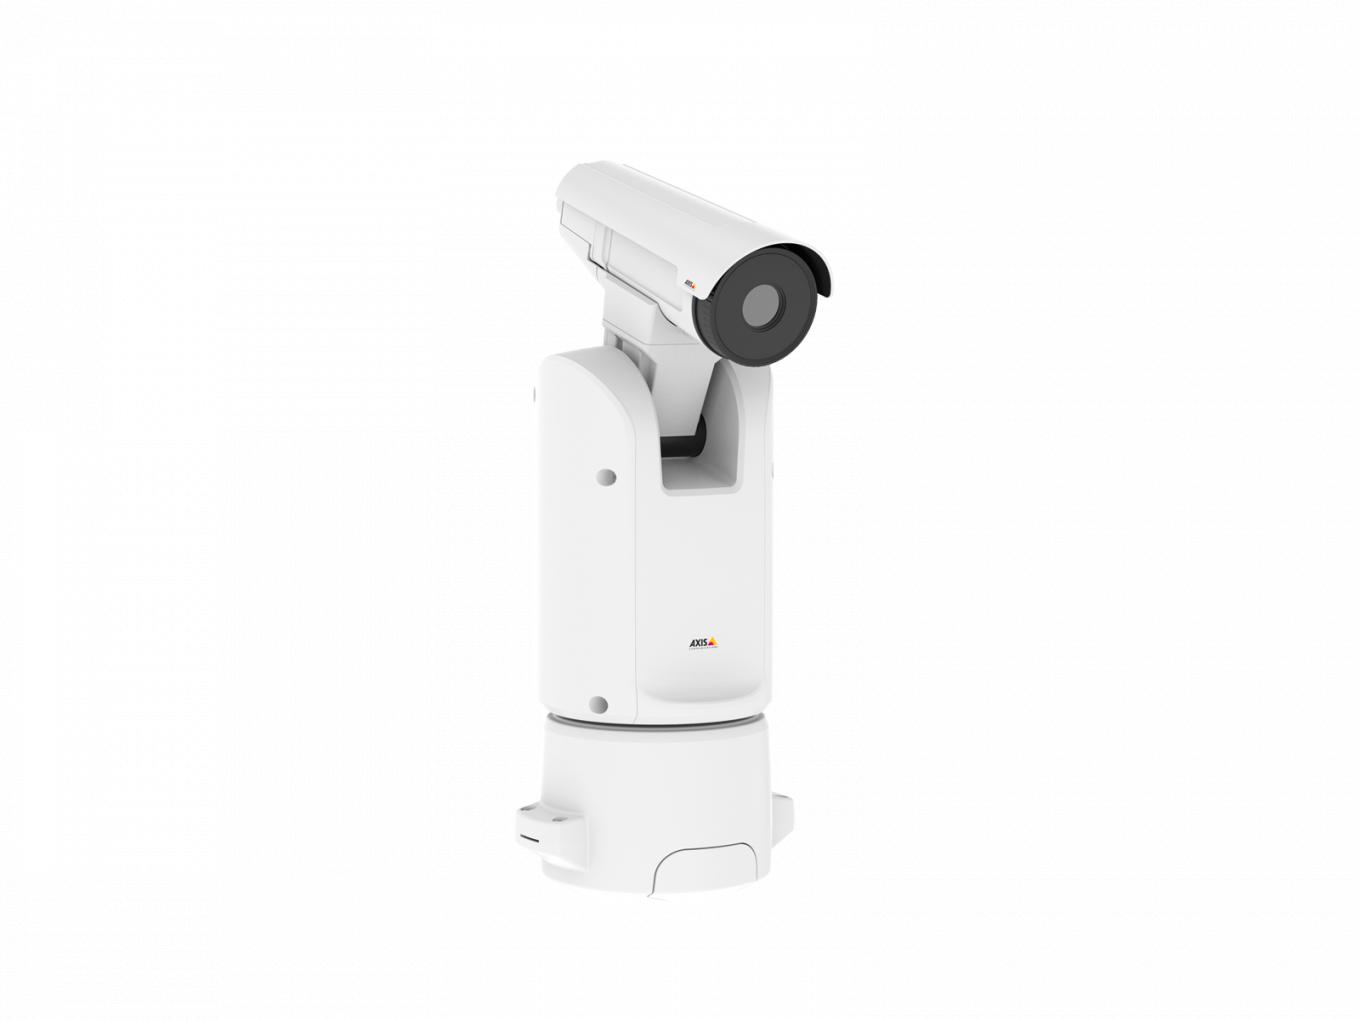 Axis Q 8641-E PT Thermal IP Camera from right angle